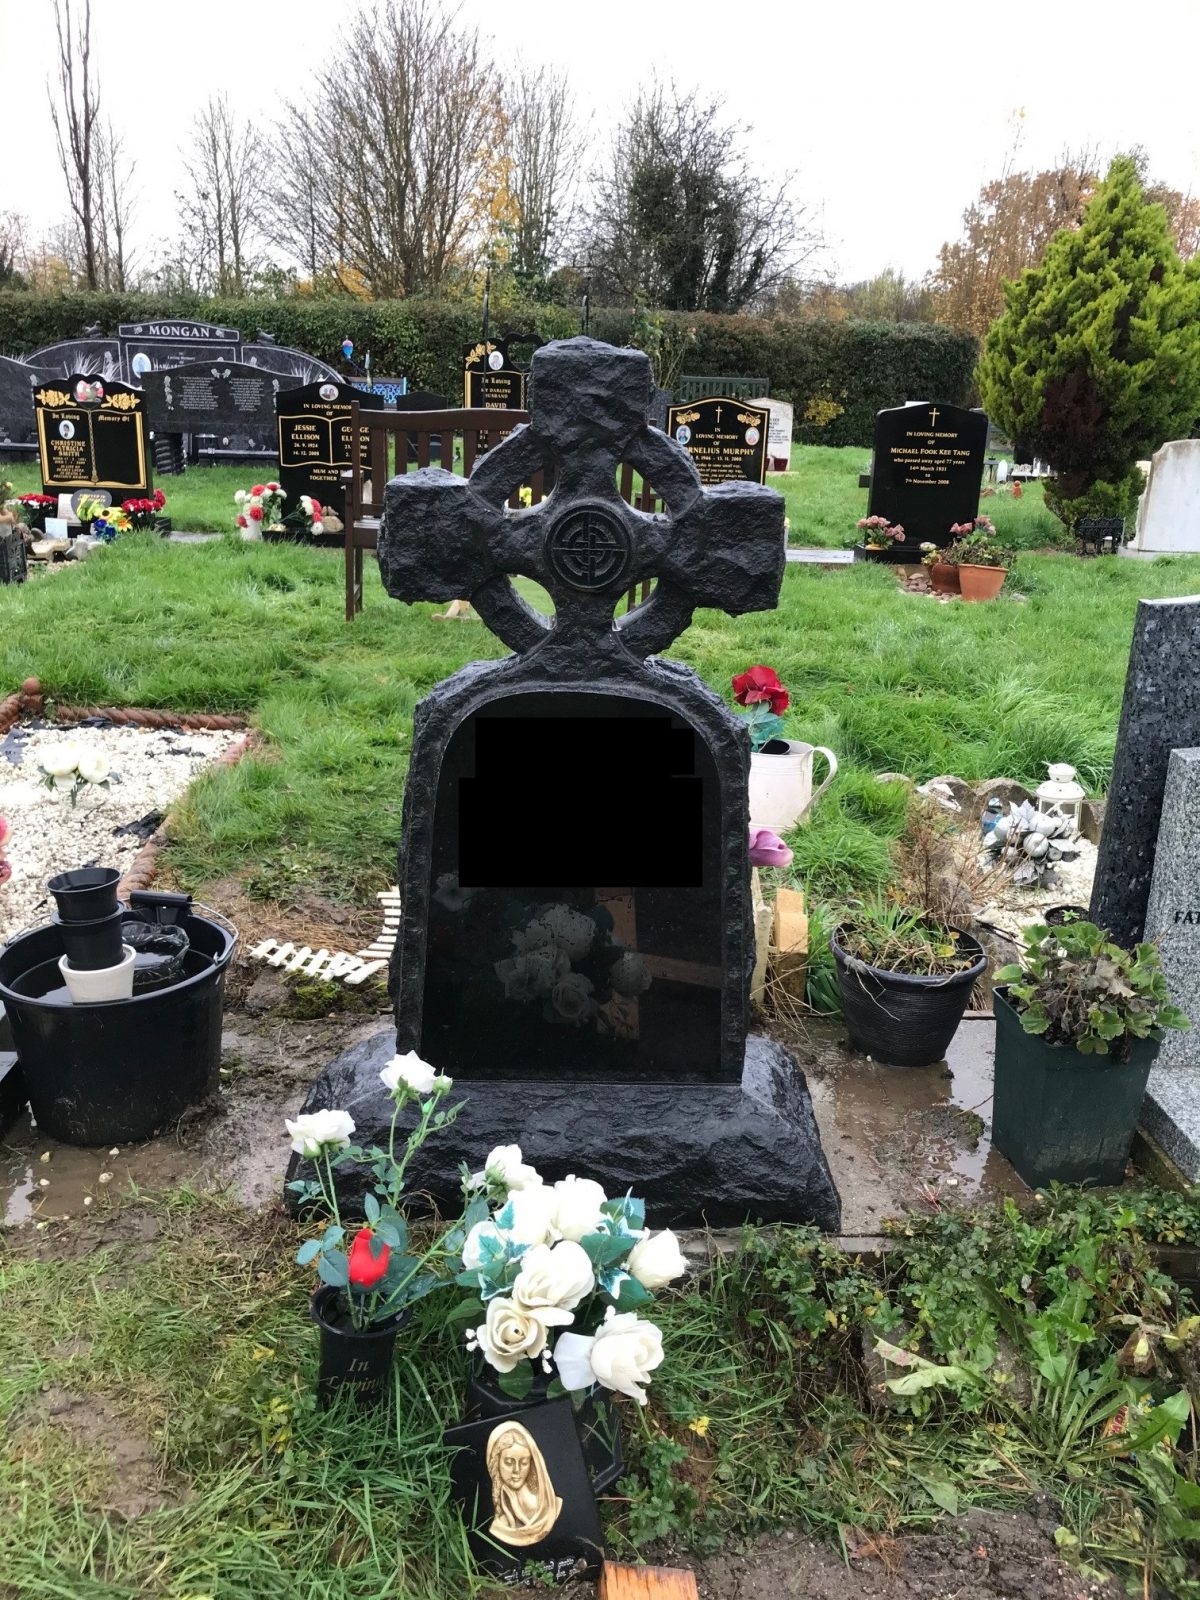 Sculptured black cross gravestone surrounded by white flowers